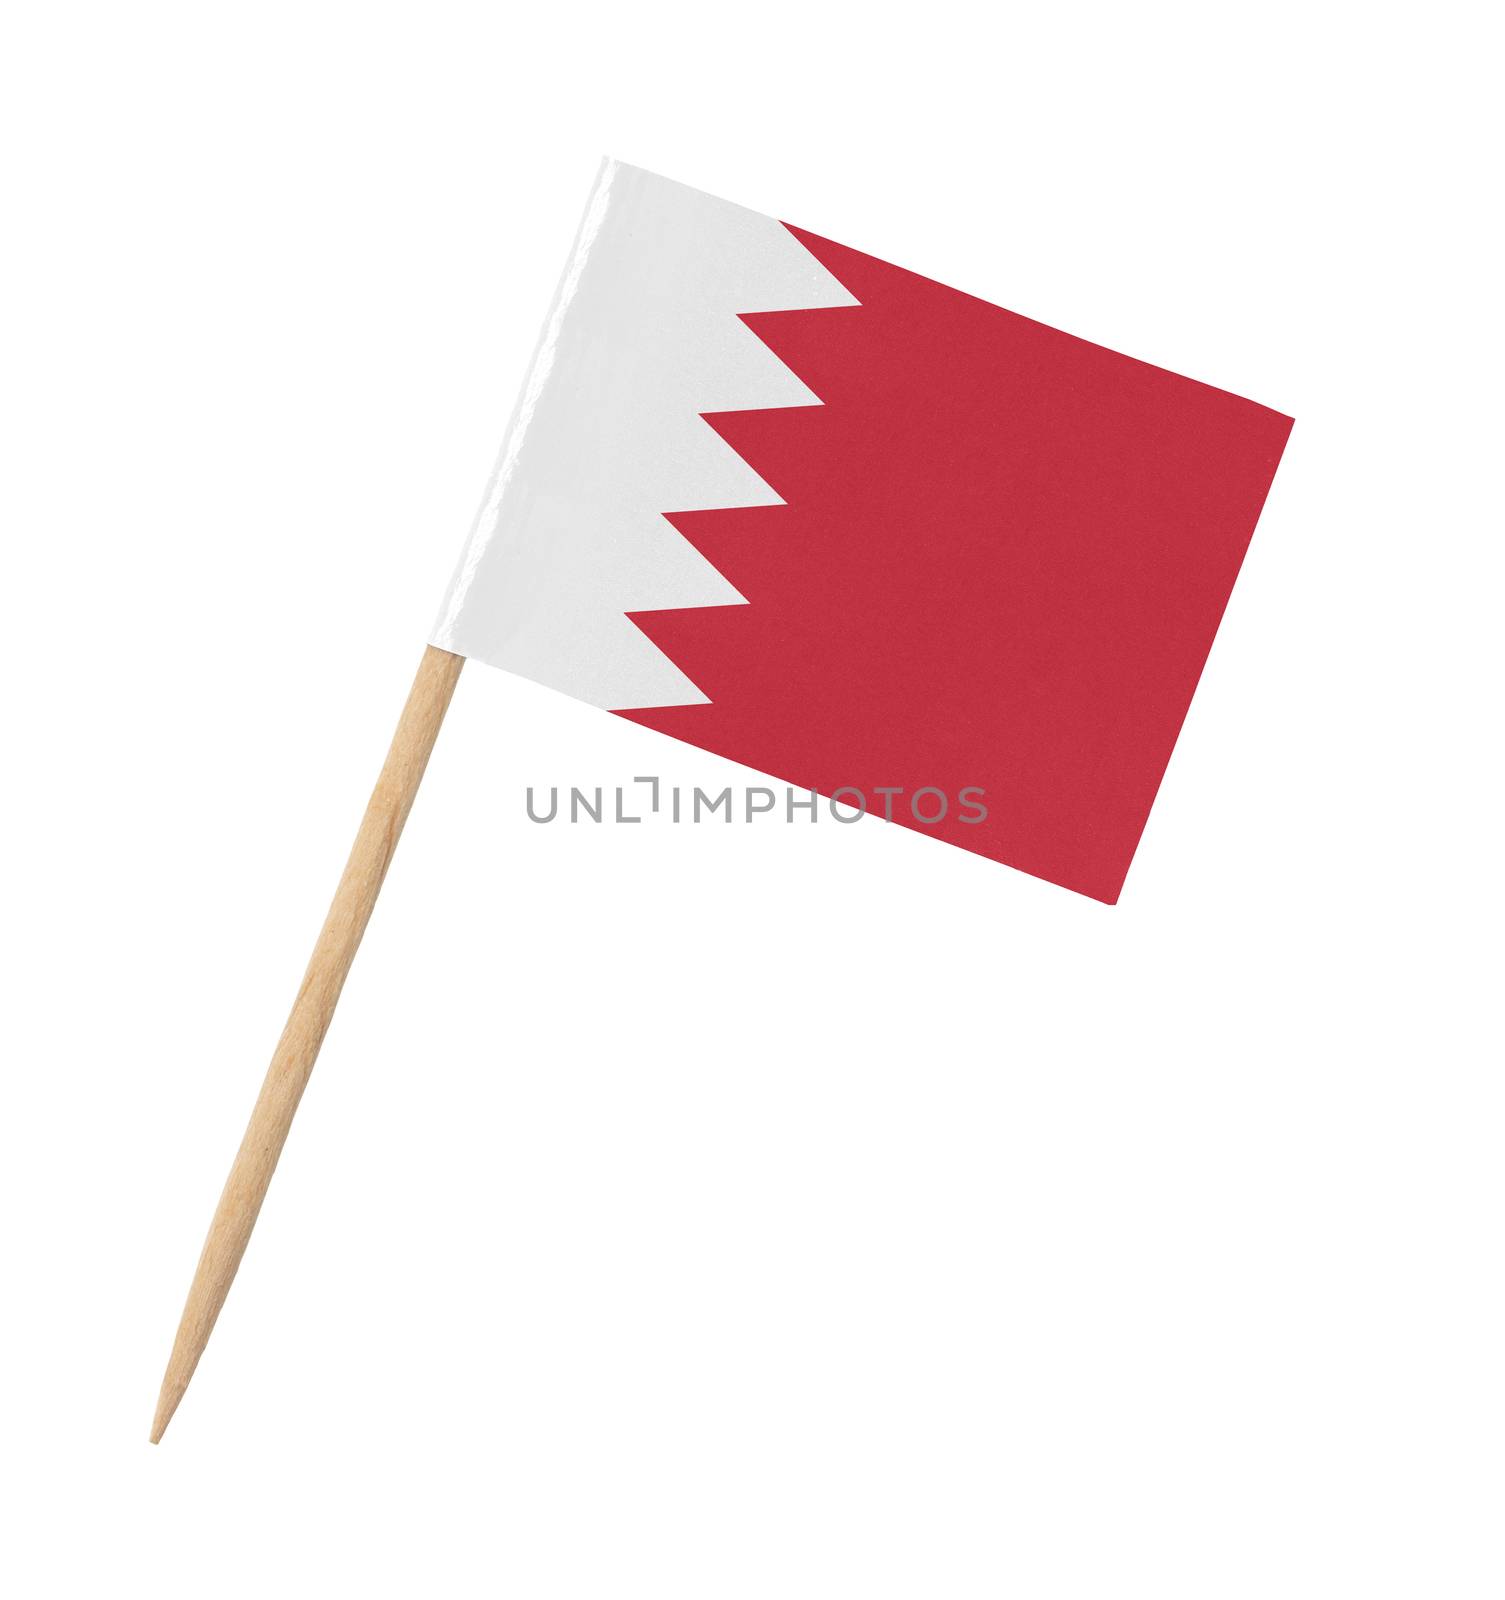 Small paper flag of Bahrain on wooden stick, isolated on white